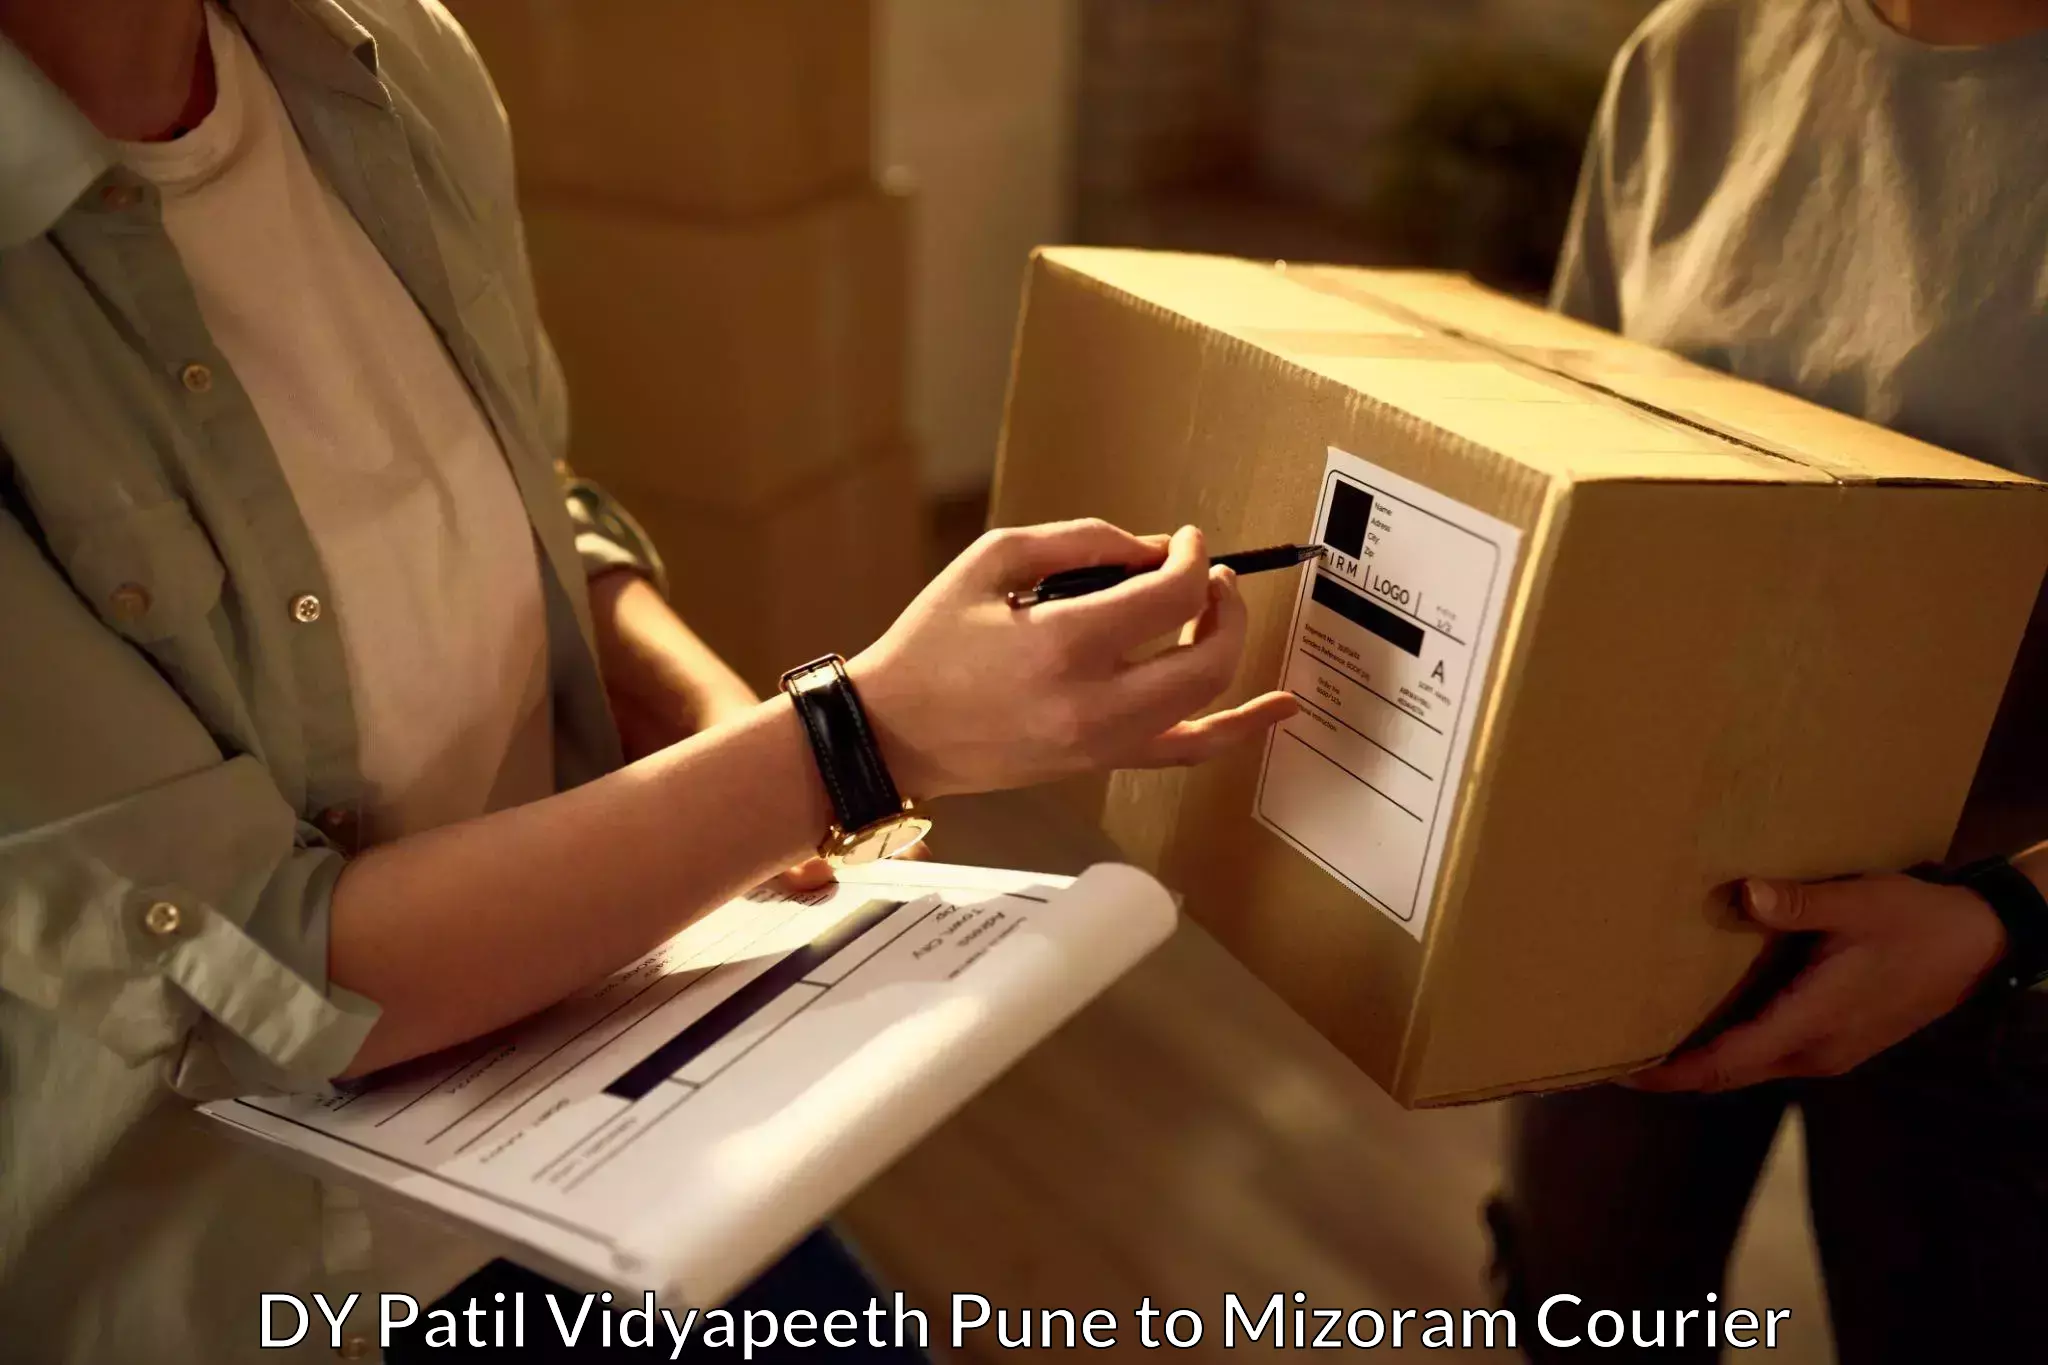 Doorstep delivery service DY Patil Vidyapeeth Pune to Darlawn